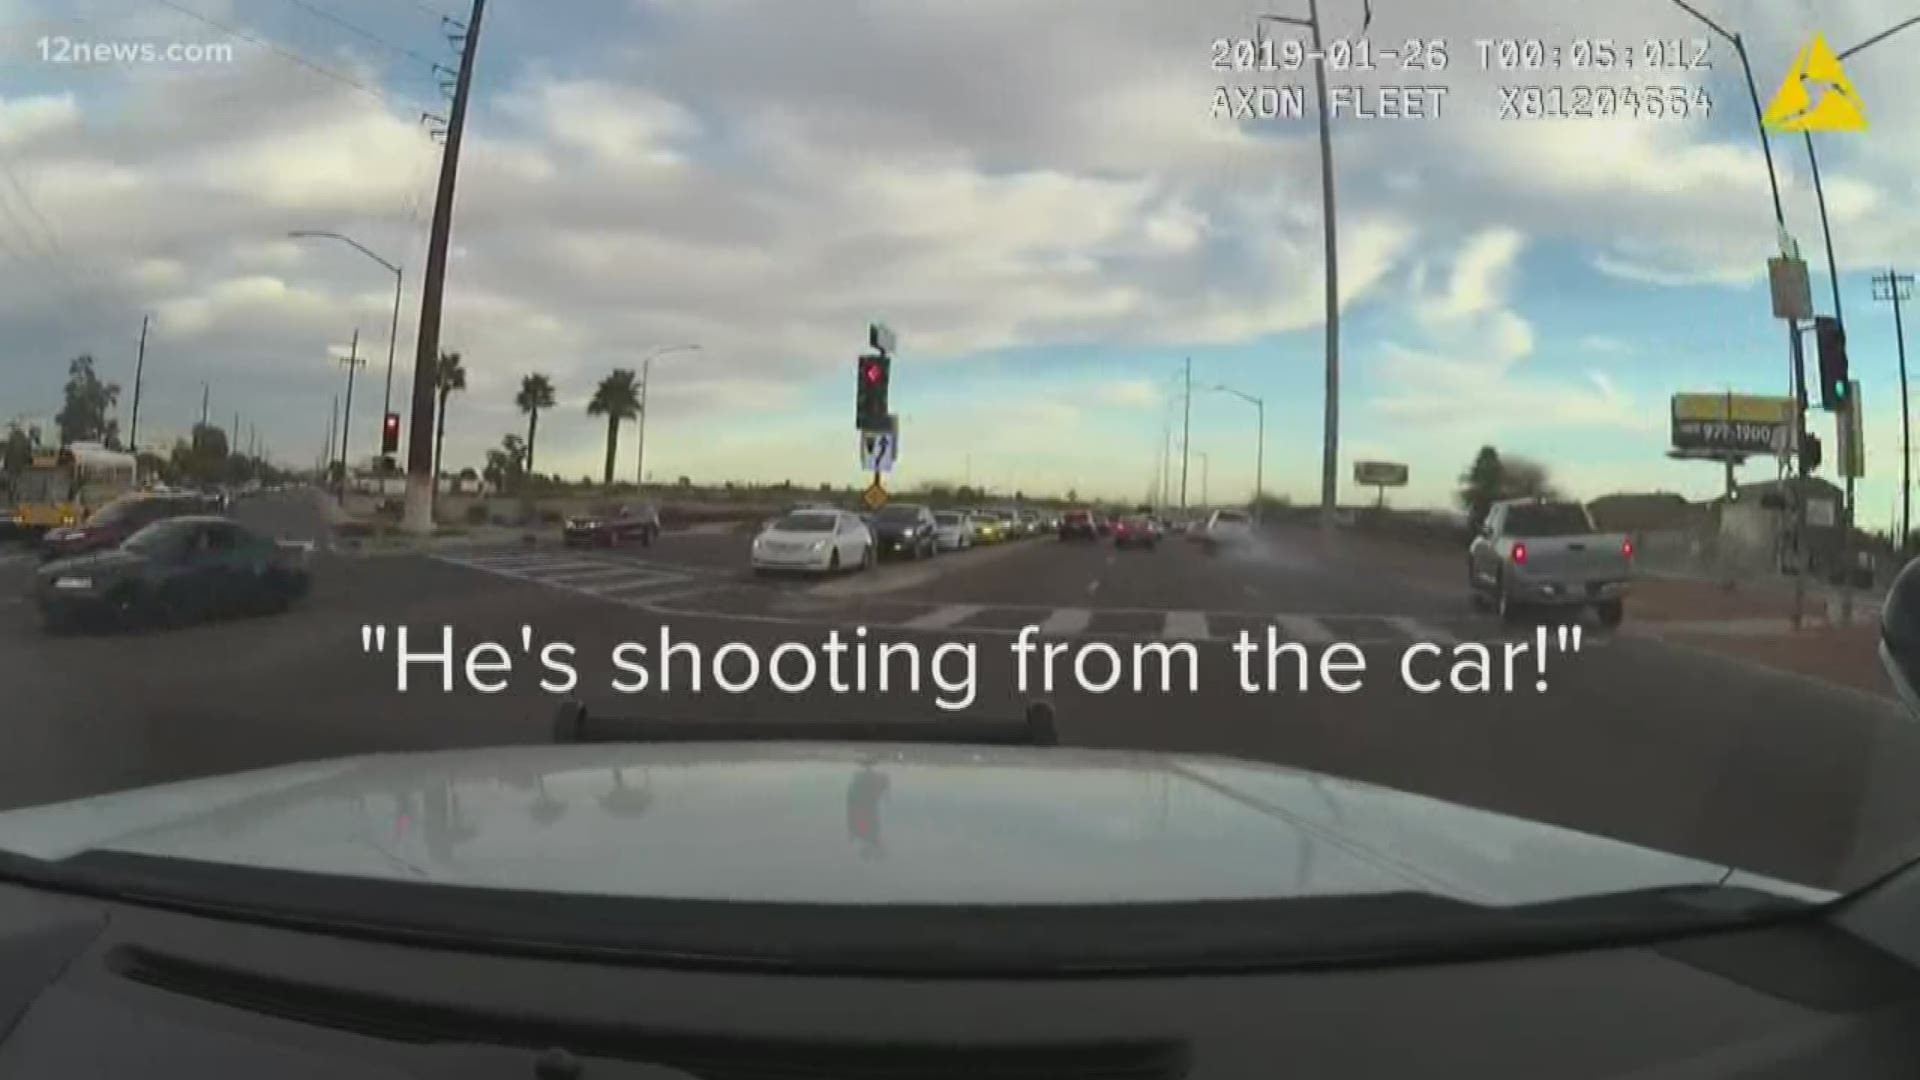 Video shows police in hot pursuit of two suspects who shot at officers from the car and then tried to run before they were taken into custody.